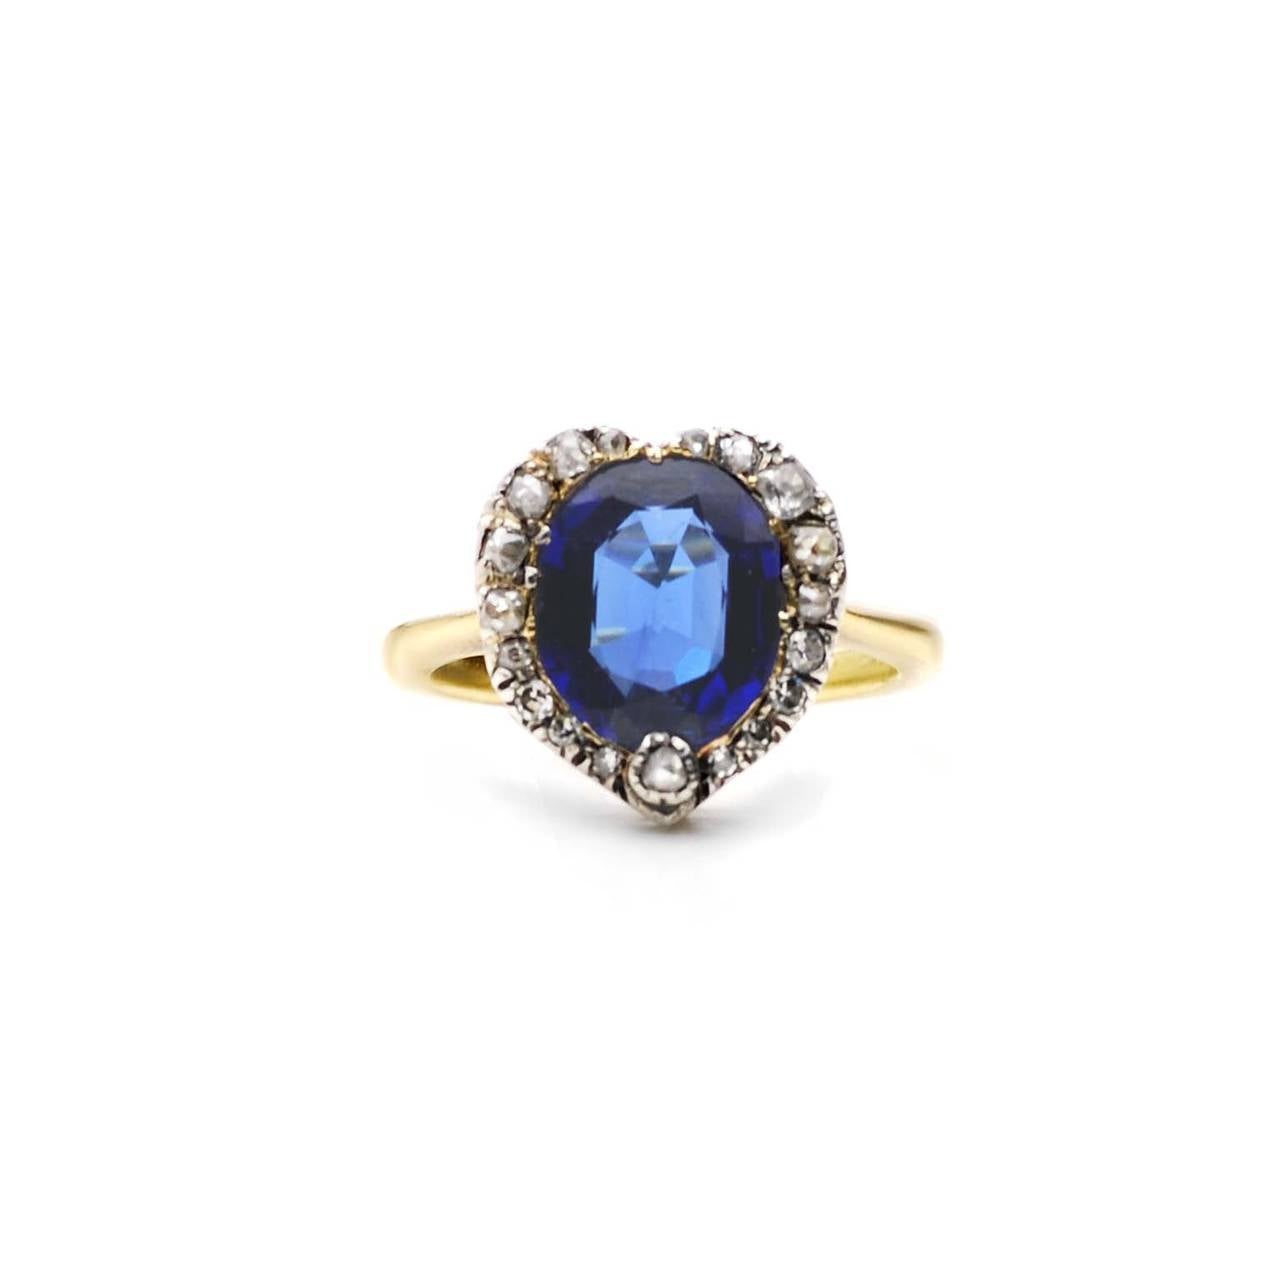 Edwardian Sapphire Ring set in 18K gold and silver. 

Estimated rose cut diamond weight: 0.32ct
Estimated cushion Burma sapphire weight: 3.00ct